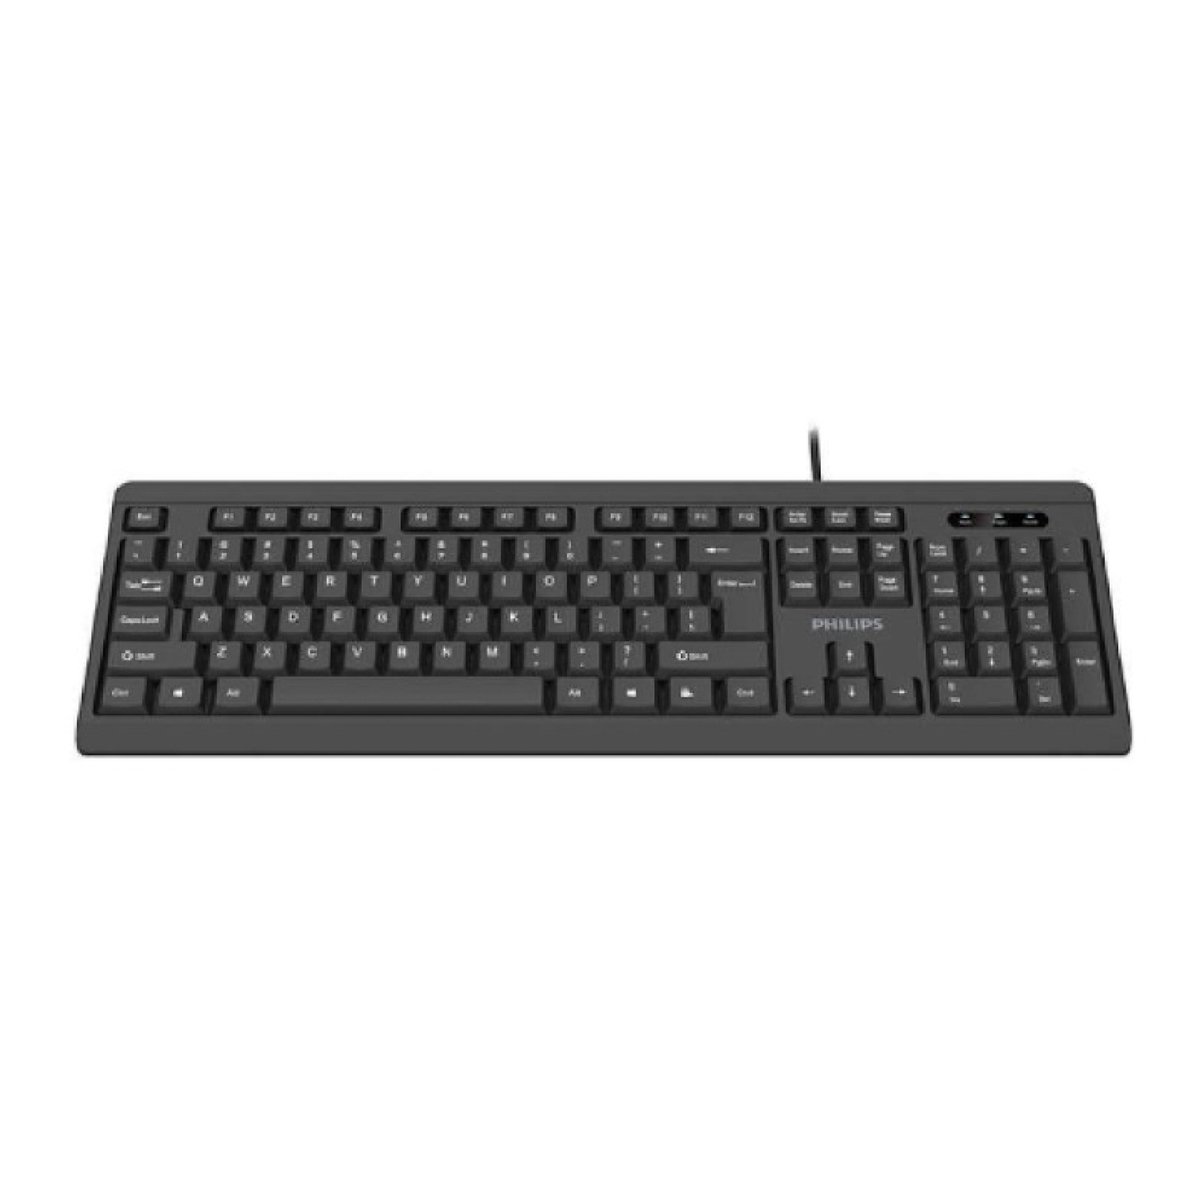 Philips USB 2.0 Plug and Play Wired Keyboard, Black